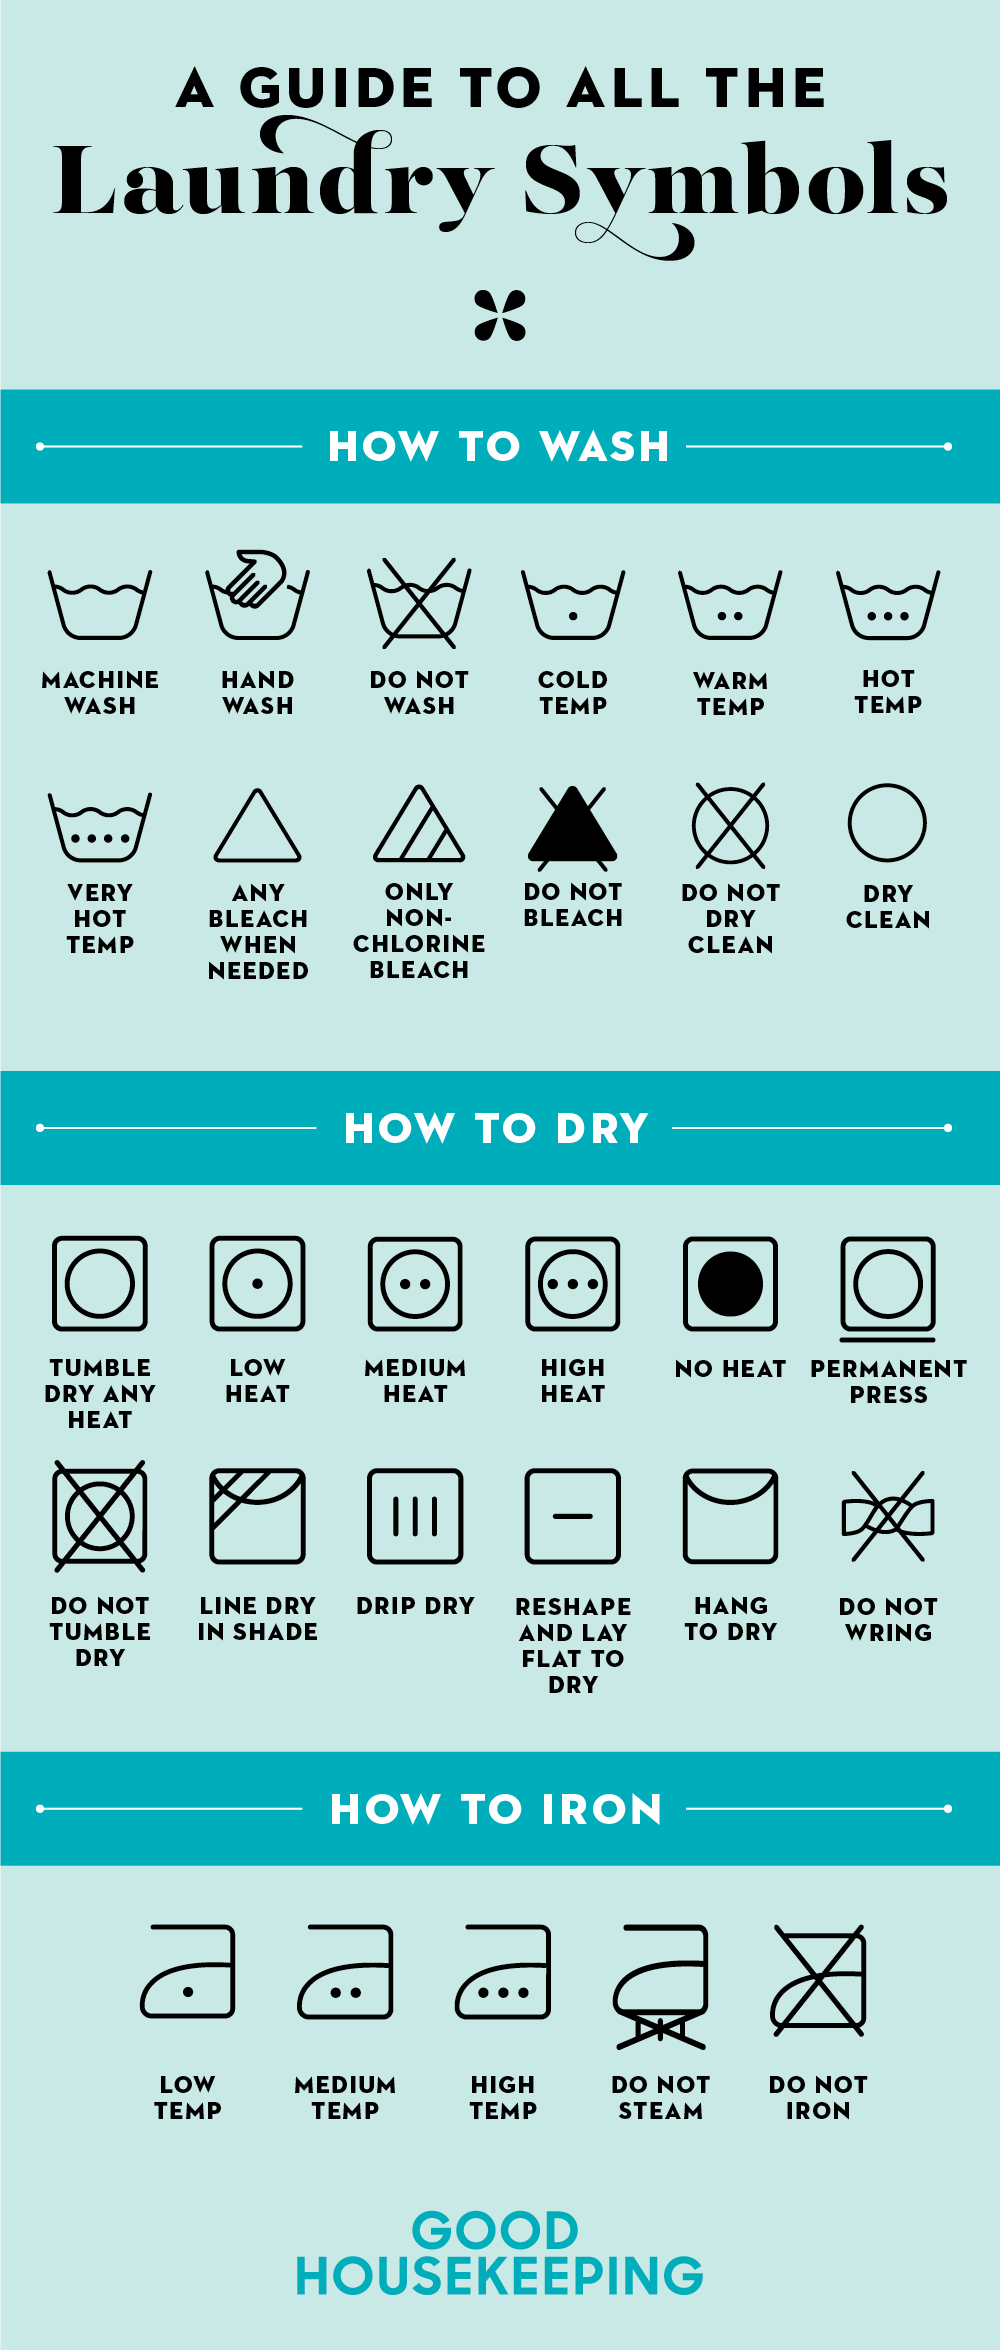 How to Hand Wash Your Clothes in 6 Easy Steps